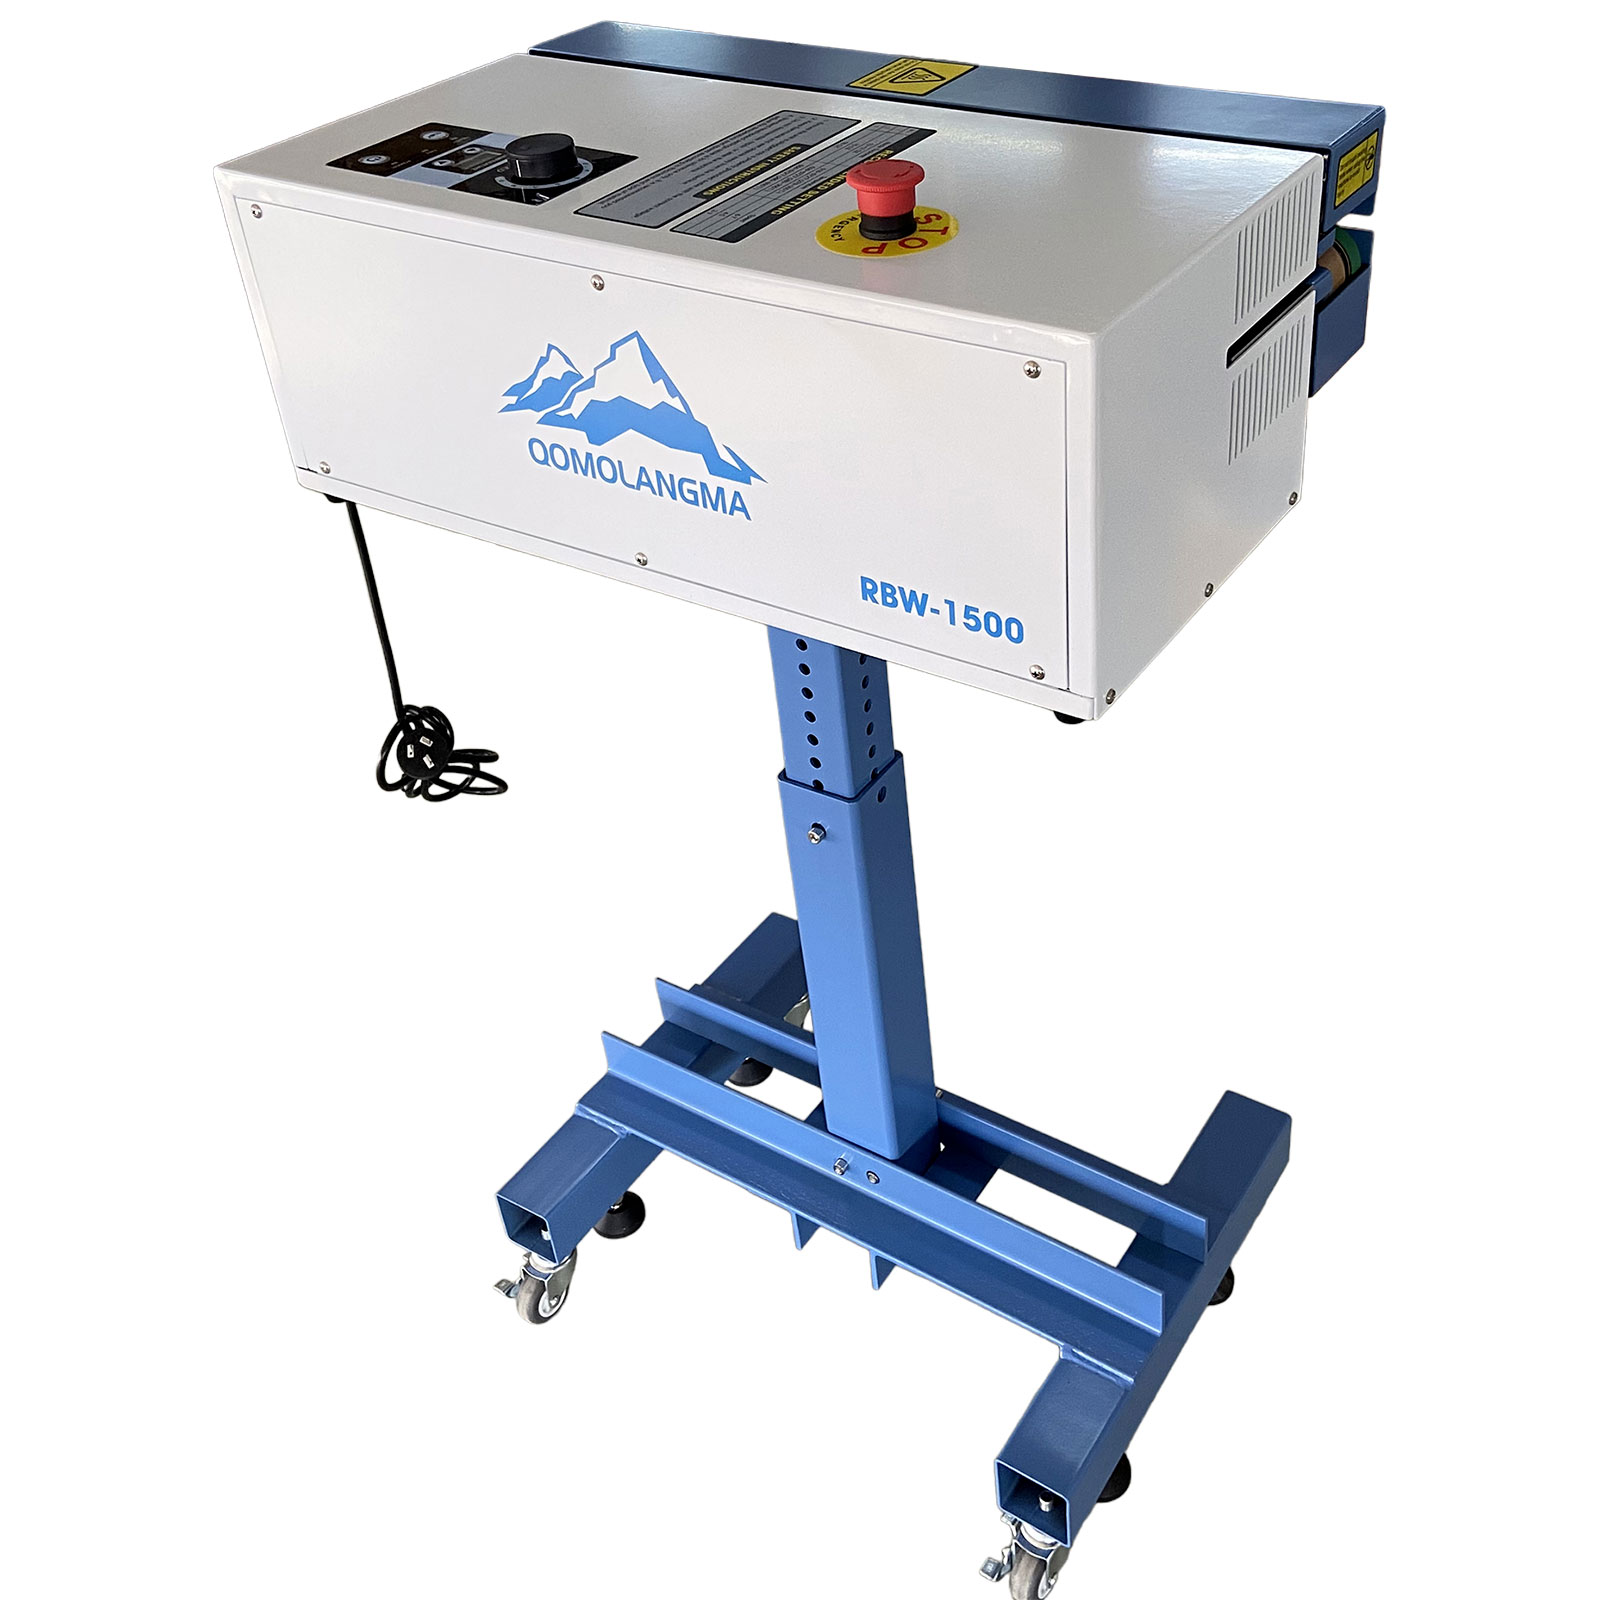 Qomolangma Semi-Automatic Banner Welder Hemming System, Alternative to Sewing and Taping for Vinyl and Fabric